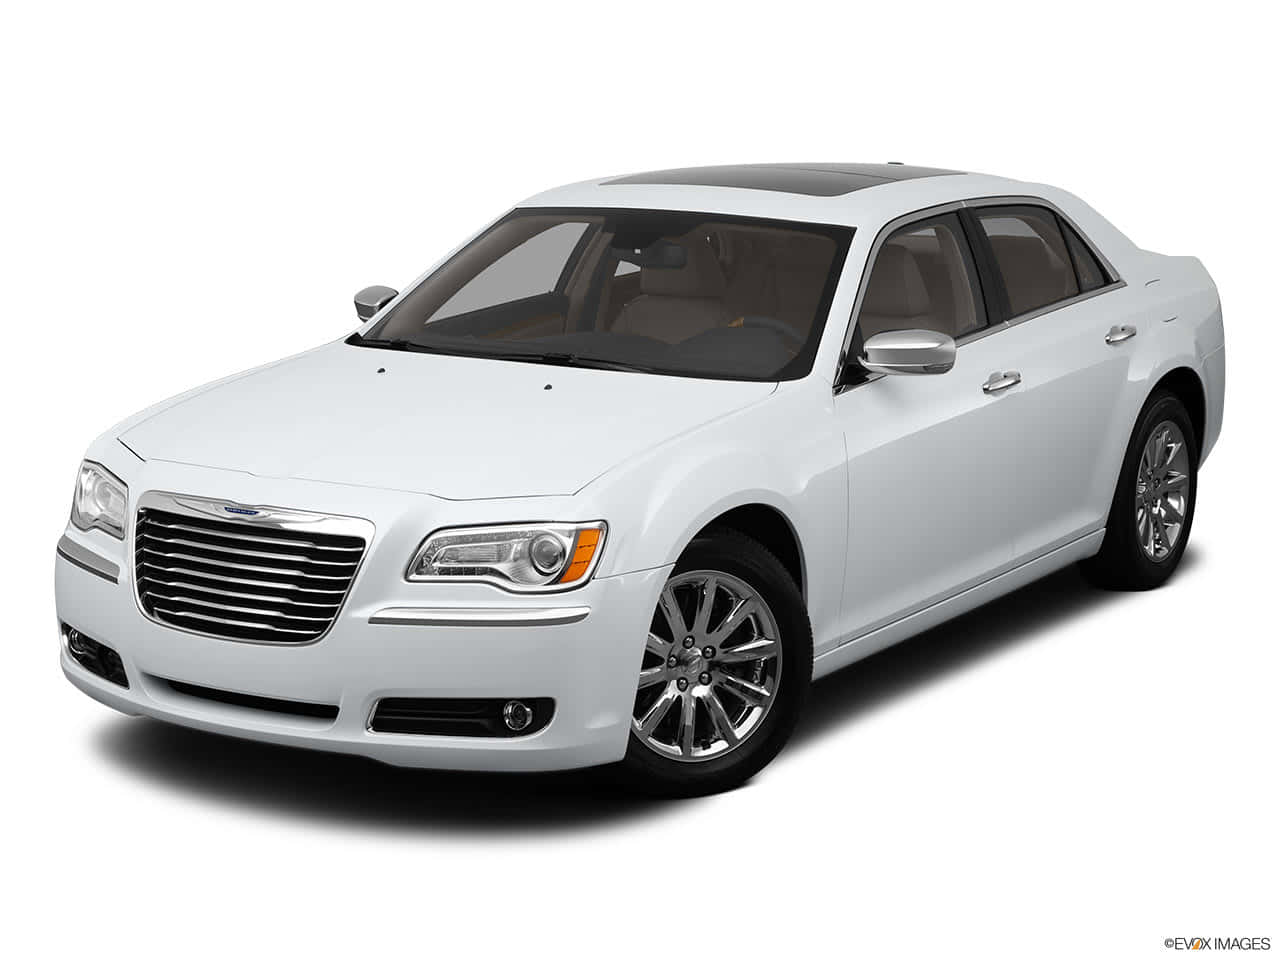 2013chrysler 300 Sedan Would Be Translated To 